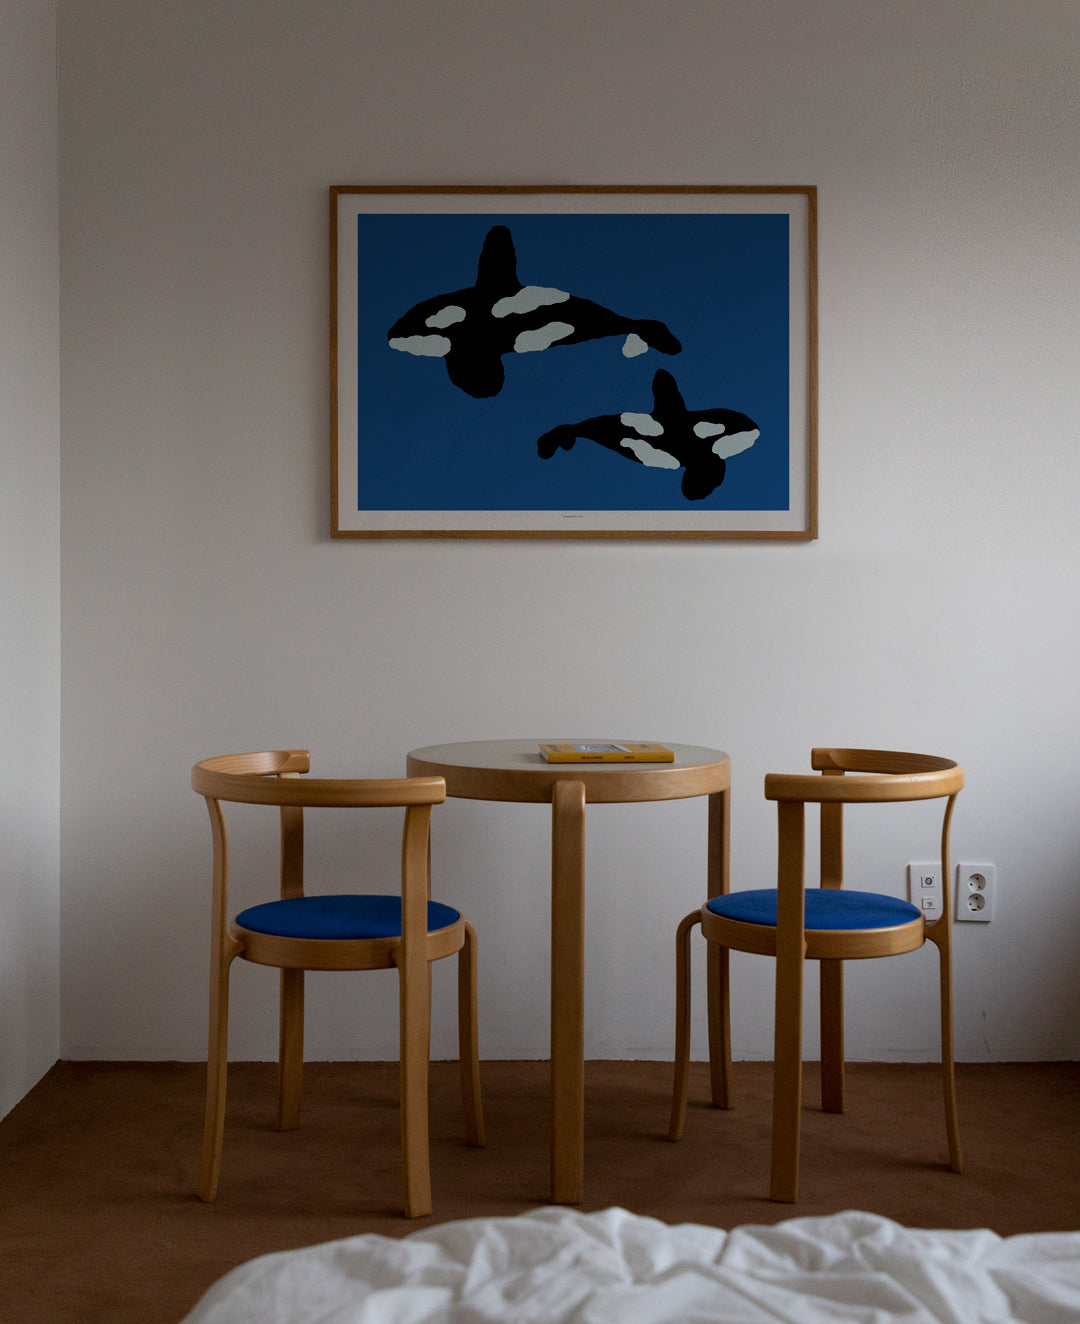 ORCA POSTER